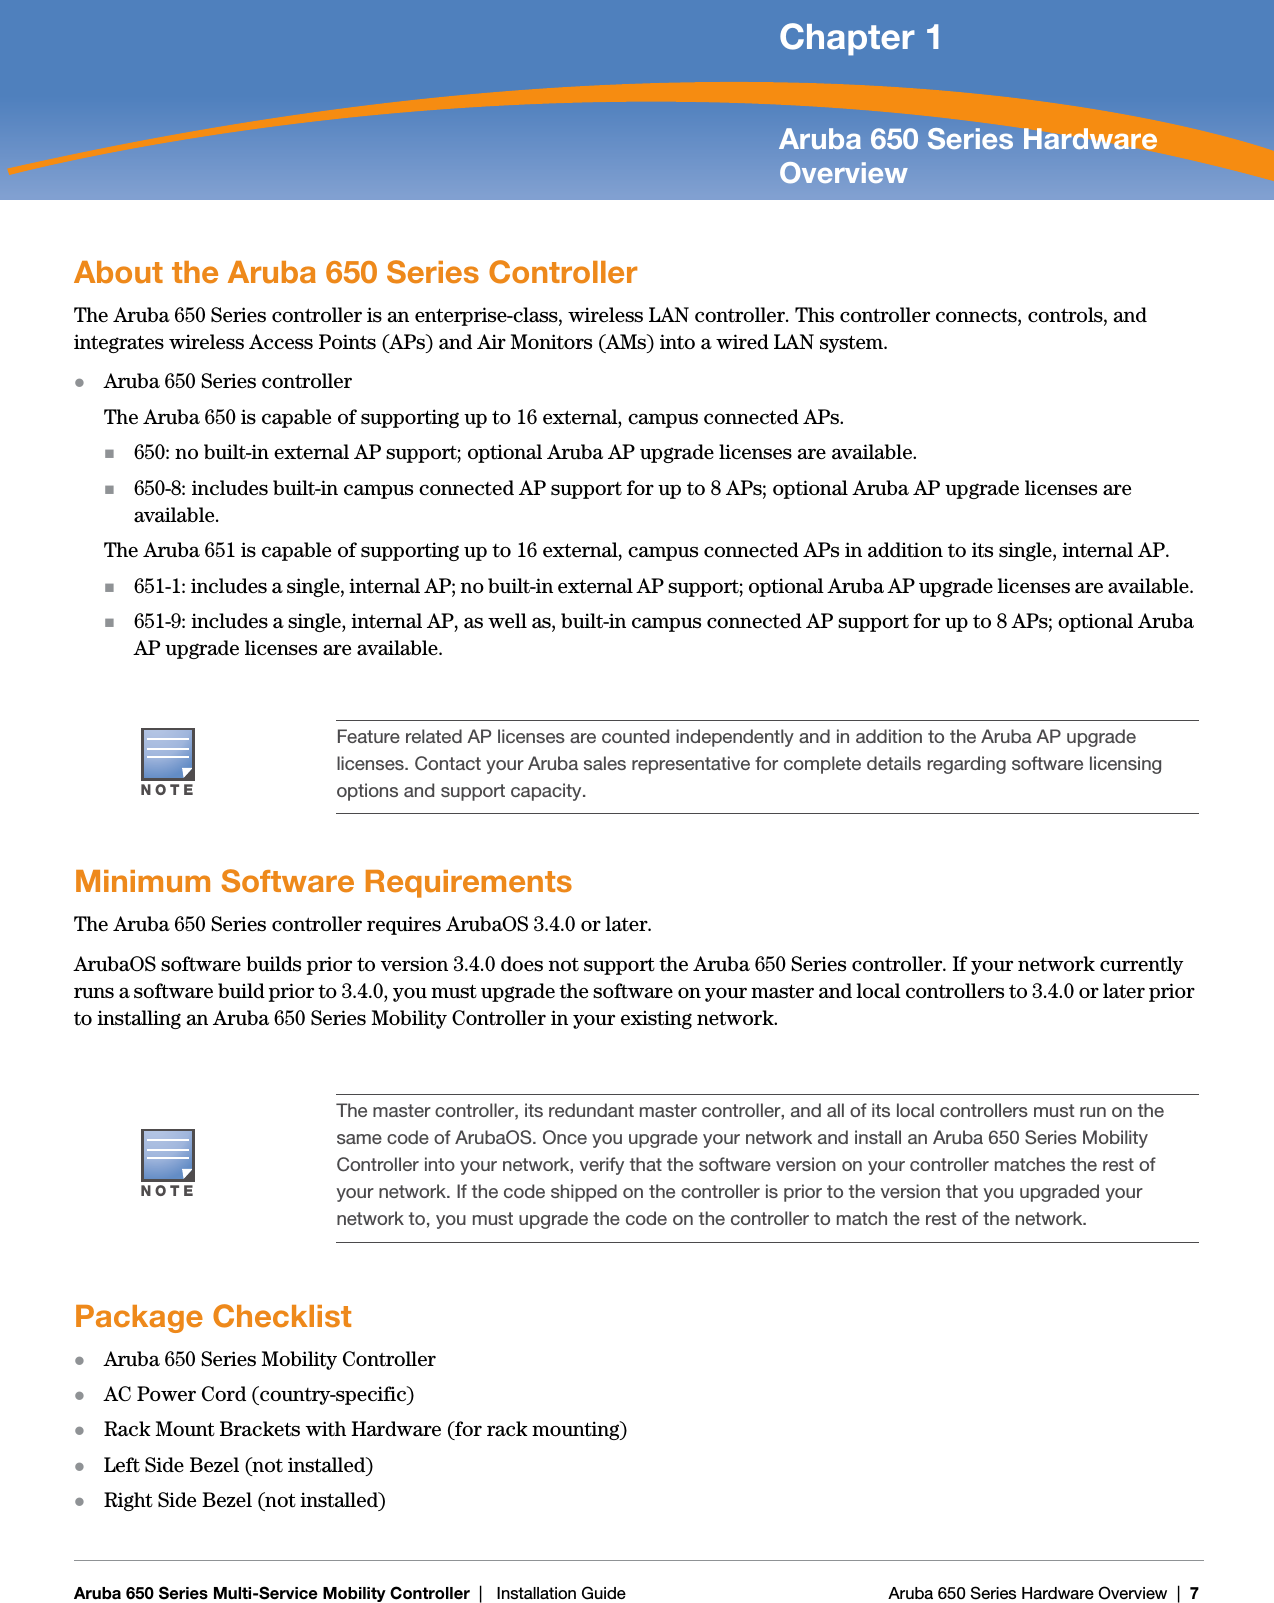 Aruba 650 Series Multi-Service Mobility Controller | Installation Guide Aruba 650 Series Hardware Overview | 7Chapter 1Aruba 650 Series Hardware OverviewAbout the Aruba 650 Series ControllerThe Aruba 650 Series controller is an enterprise-class, wireless LAN controller. This controller connects, controls, and integrates wireless Access Points (APs) and Air Monitors (AMs) into a wired LAN system.zAruba 650 Series controllerThe Aruba 650 is capable of supporting up to 16 external, campus connected APs.650: no built-in external AP support; optional Aruba AP upgrade licenses are available. 650-8: includes built-in campus connected AP support for up to 8 APs; optional Aruba AP upgrade licenses are available.The Aruba 651 is capable of supporting up to 16 external, campus connected APs in addition to its single, internal AP. 651-1: includes a single, internal AP; no built-in external AP support; optional Aruba AP upgrade licenses are available. 651-9: includes a single, internal AP, as well as, built-in campus connected AP support for up to 8 APs; optional Aruba AP upgrade licenses are available. Minimum Software RequirementsThe Aruba 650 Series controller requires ArubaOS 3.4.0 or later.ArubaOS software builds prior to version 3.4.0 does not support the Aruba 650 Series controller. If your network currently runs a software build prior to 3.4.0, you must upgrade the software on your master and local controllers to 3.4.0 or later prior to installing an Aruba 650 Series Mobility Controller in your existing network.Package ChecklistzAruba 650 Series Mobility ControllerzAC Power Cord (country-specific)zRack Mount Brackets with Hardware (for rack mounting)zLeft Side Bezel (not installed)zRight Side Bezel (not installed)NOTEFeature related AP licenses are counted independently and in addition to the Aruba AP upgrade licenses. Contact your Aruba sales representative for complete details regarding software licensing options and support capacity.NOTEThe master controller, its redundant master controller, and all of its local controllers must run on the same code of ArubaOS. Once you upgrade your network and install an Aruba 650 Series Mobility Controller into your network, verify that the software version on your controller matches the rest of your network. If the code shipped on the controller is prior to the version that you upgraded your network to, you must upgrade the code on the controller to match the rest of the network. 